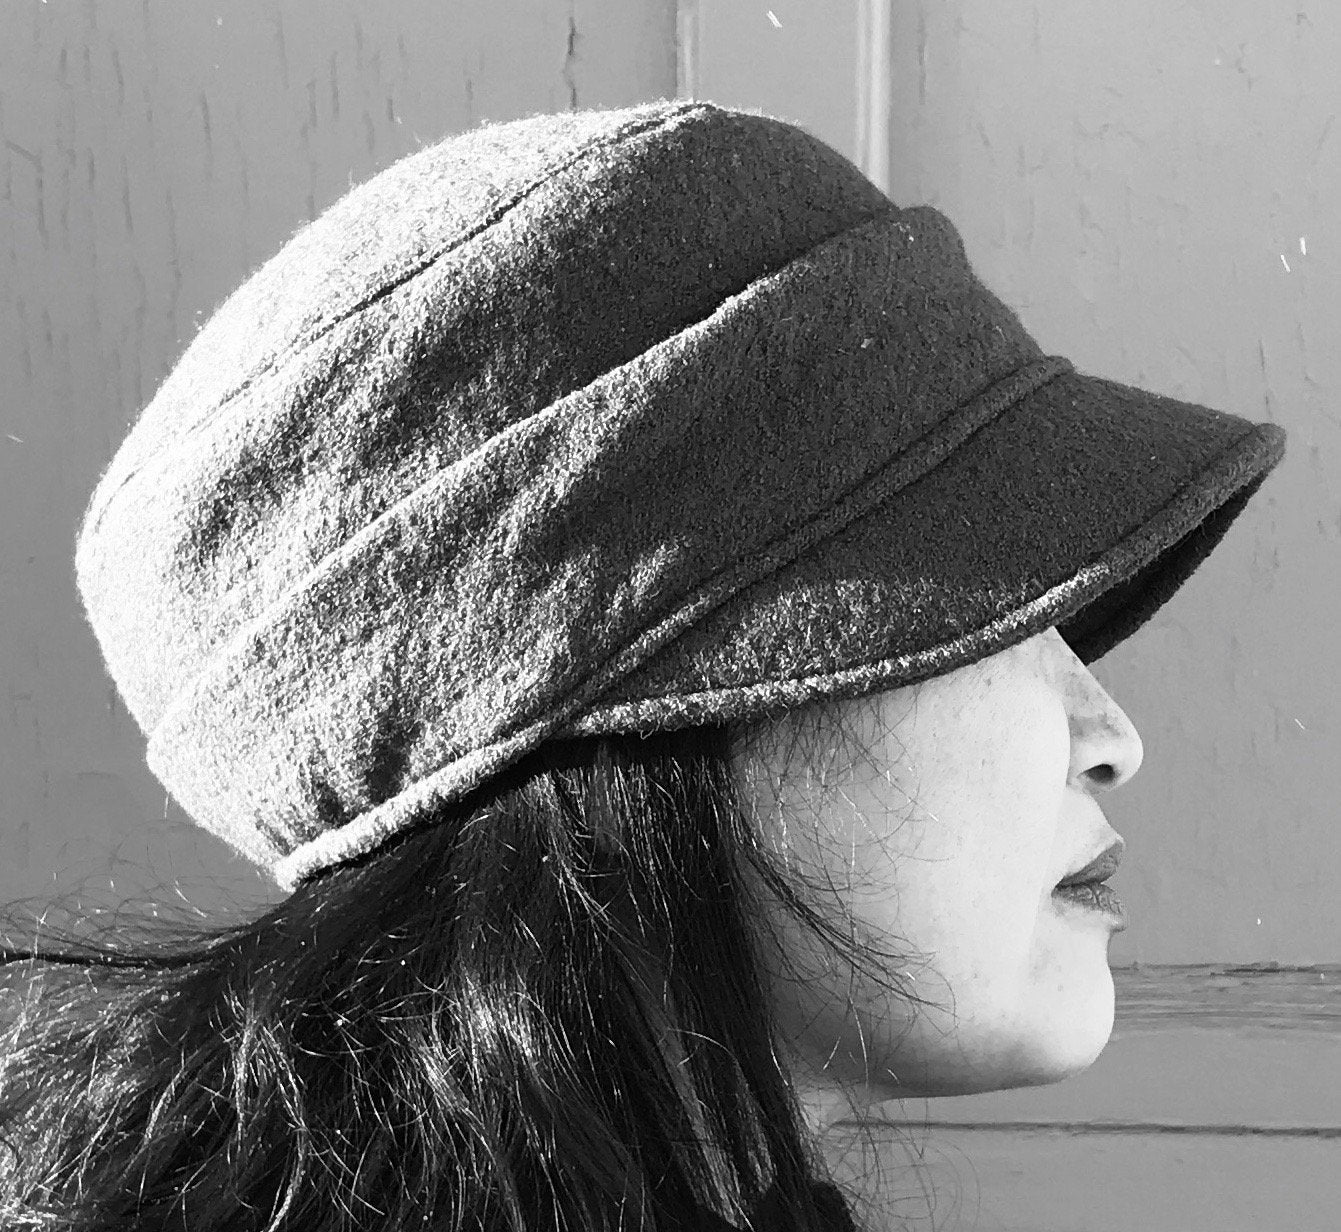 Blue Winter Cap | Boiled Wool | Made in Canada | Hats | Montreal | Genevieve Dostaler